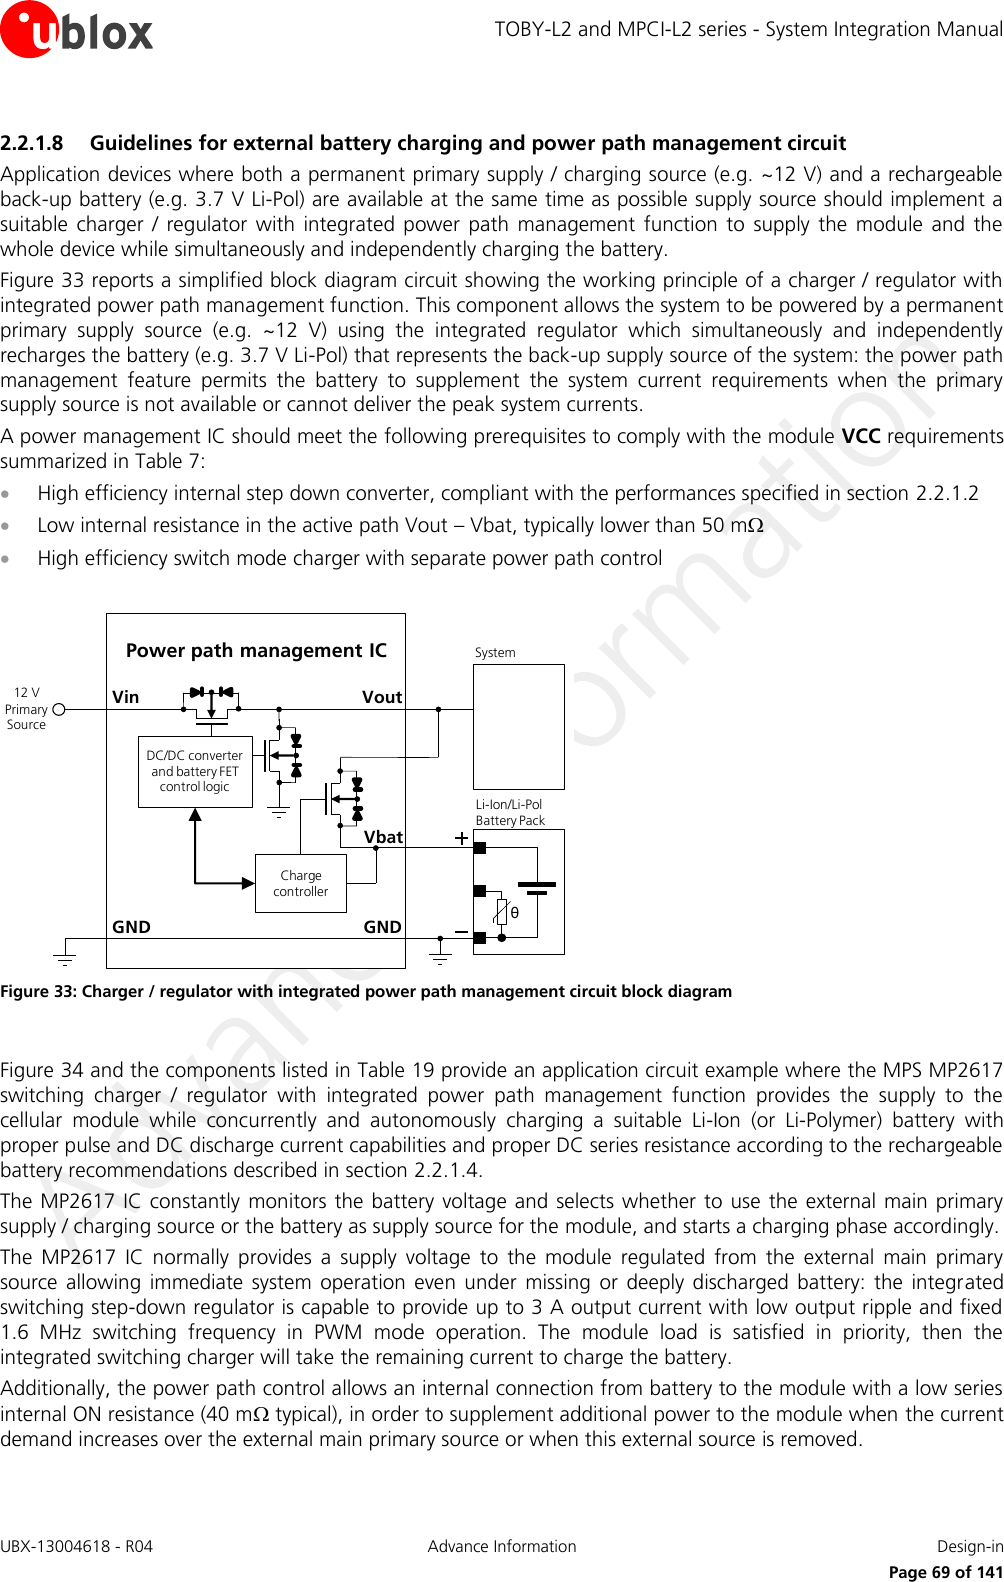 TOBY-L2 and MPCI-L2 series - System Integration Manual UBX-13004618 - R04  Advance Information  Design-in     Page 69 of 141 2.2.1.8 Guidelines for external battery charging and power path management circuit Application devices where both a permanent primary supply / charging source (e.g. ~12 V) and a rechargeable back-up battery (e.g. 3.7 V Li-Pol) are available at the same time as possible supply source should implement a suitable  charger  /  regulator  with  integrated  power  path  management  function  to  supply  the  module  and  the whole device while simultaneously and independently charging the battery. Figure 33 reports a simplified block diagram circuit showing the working principle of a charger / regulator with integrated power path management function. This component allows the system to be powered by a permanent primary  supply  source  (e.g.  ~12  V)  using  the  integrated  regulator  which  simultaneously  and  independently recharges the battery (e.g. 3.7 V Li-Pol) that represents the back-up supply source of the system: the power path management  feature  permits  the  battery  to  supplement  the  system  current  requirements  when  the  primary supply source is not available or cannot deliver the peak system currents. A power management IC should meet the following prerequisites to comply with the module VCC requirements summarized in Table 7:  High efficiency internal step down converter, compliant with the performances specified in section 2.2.1.2  Low internal resistance in the active path Vout – Vbat, typically lower than 50 m  High efficiency switch mode charger with separate power path control  GNDPower path management ICVoutVinθLi-Ion/Li-Pol Battery PackGNDSystem12 V Primary SourceCharge controllerDC/DC converter and battery FET control logicVbat Figure 33: Charger / regulator with integrated power path management circuit block diagram  Figure 34 and the components listed in Table 19 provide an application circuit example where the MPS MP2617 switching  charger  /  regulator  with  integrated  power  path  management  function  provides  the  supply  to  the cellular  module  while  concurrently  and  autonomously  charging  a  suitable  Li-Ion  (or  Li-Polymer)  battery  with proper pulse and DC discharge current capabilities and proper DC series resistance according to the rechargeable battery recommendations described in section 2.2.1.4. The MP2617 IC  constantly  monitors the battery voltage and selects  whether to  use  the  external main primary supply / charging source or the battery as supply source for the module, and starts a charging phase accordingly.  The  MP2617  IC  normally  provides  a  supply  voltage  to  the  module  regulated  from  the  external  main  primary source  allowing  immediate  system  operation  even  under  missing  or  deeply  discharged  battery:  the  integrated switching step-down regulator is capable to provide up to 3 A output current with low output ripple and fixed 1.6  MHz  switching  frequency  in  PWM  mode  operation.  The  module  load  is  satisfied  in  priority,  then  the integrated switching charger will take the remaining current to charge the battery. Additionally, the power path control allows an internal connection from battery to the module with a low series internal ON resistance (40 m typical), in order to supplement additional power to the module when the current demand increases over the external main primary source or when this external source is removed.  